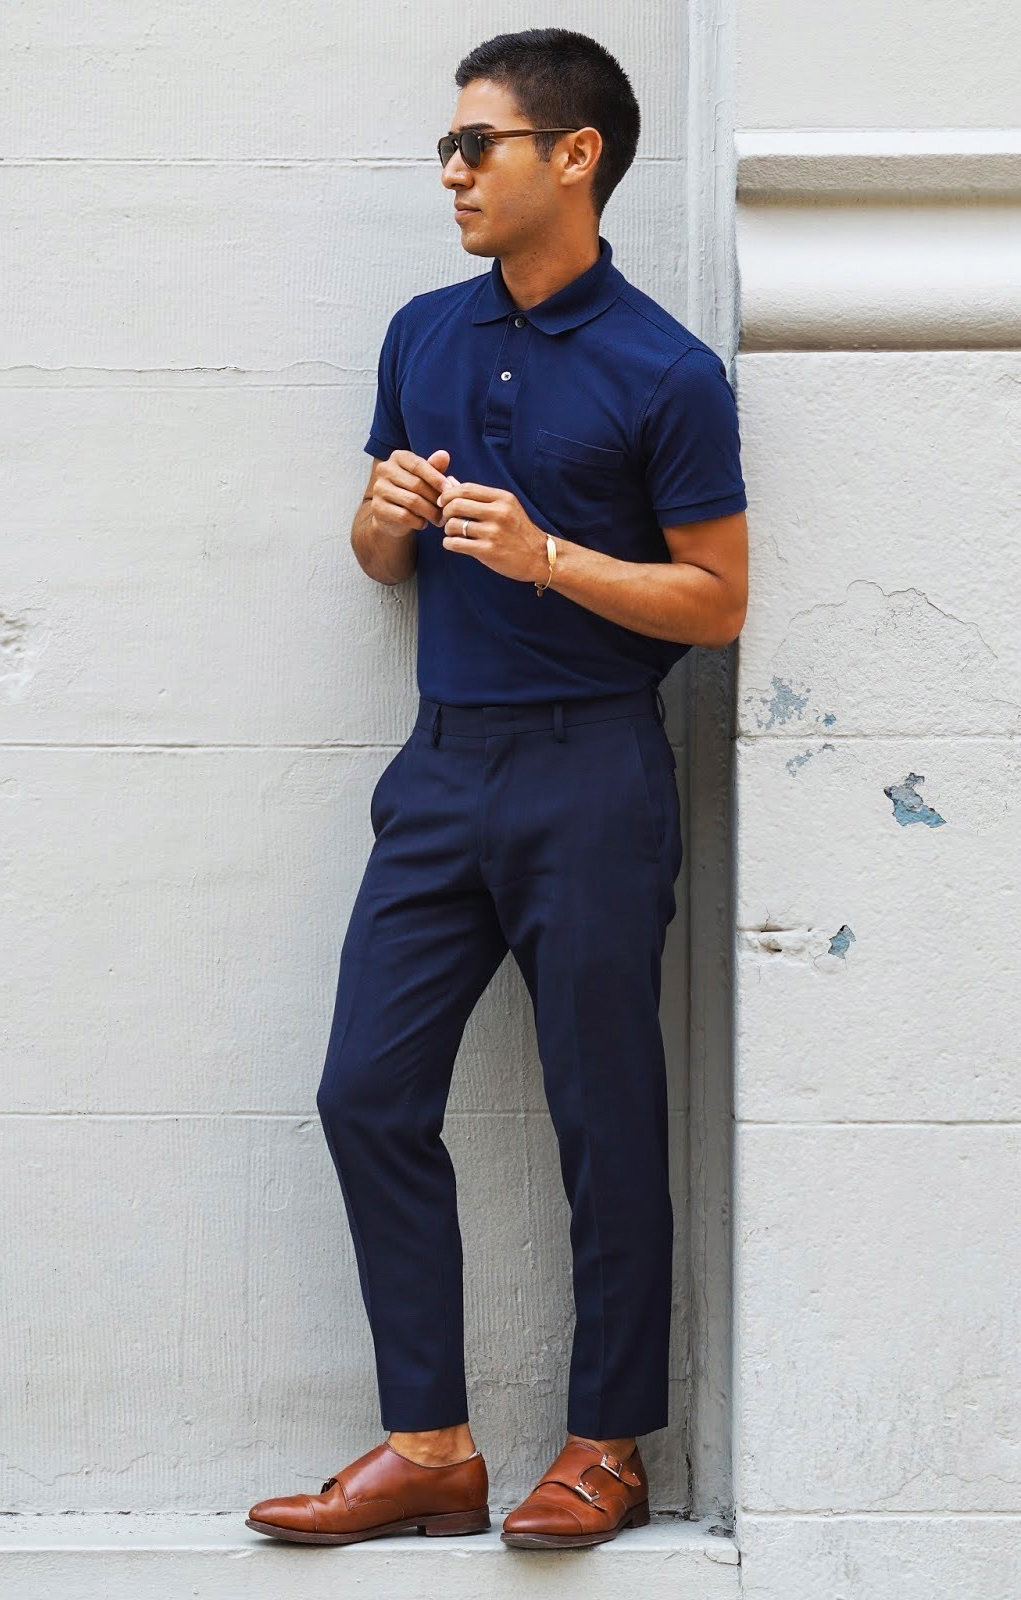 Navy polo shirt, navy blue pants, and brown leather double monks outfit